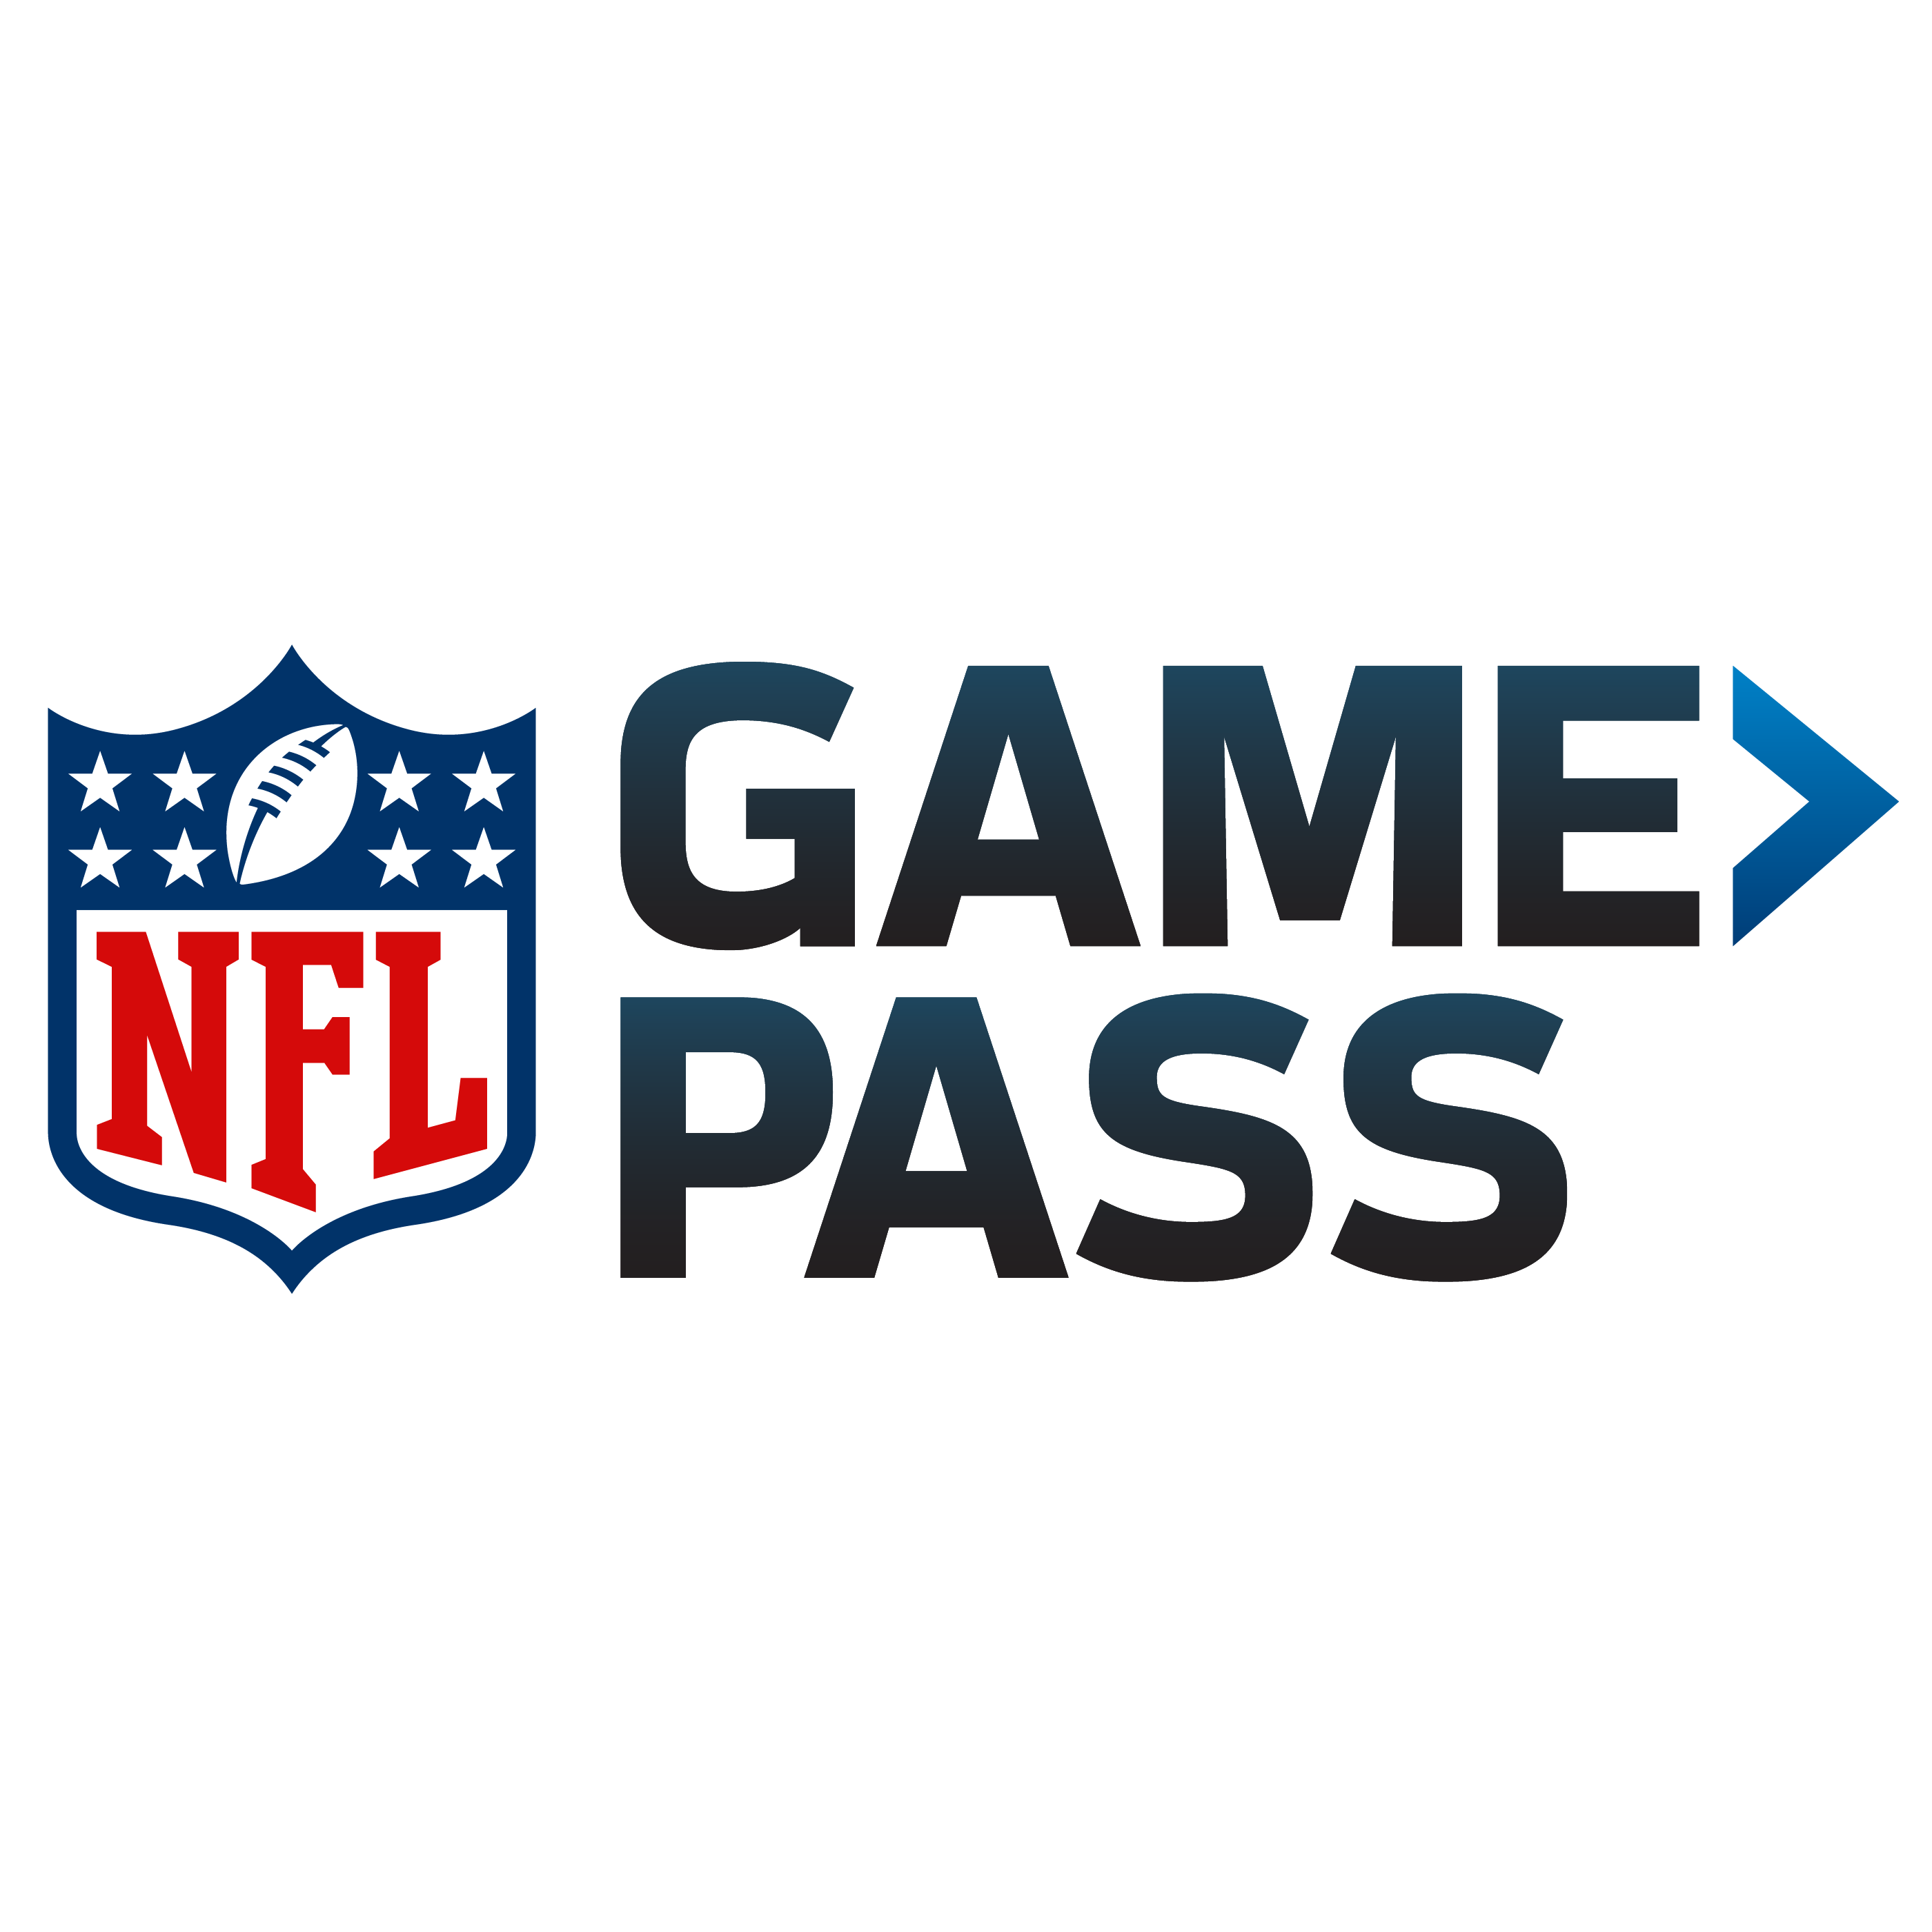 nfl game pass app android tv